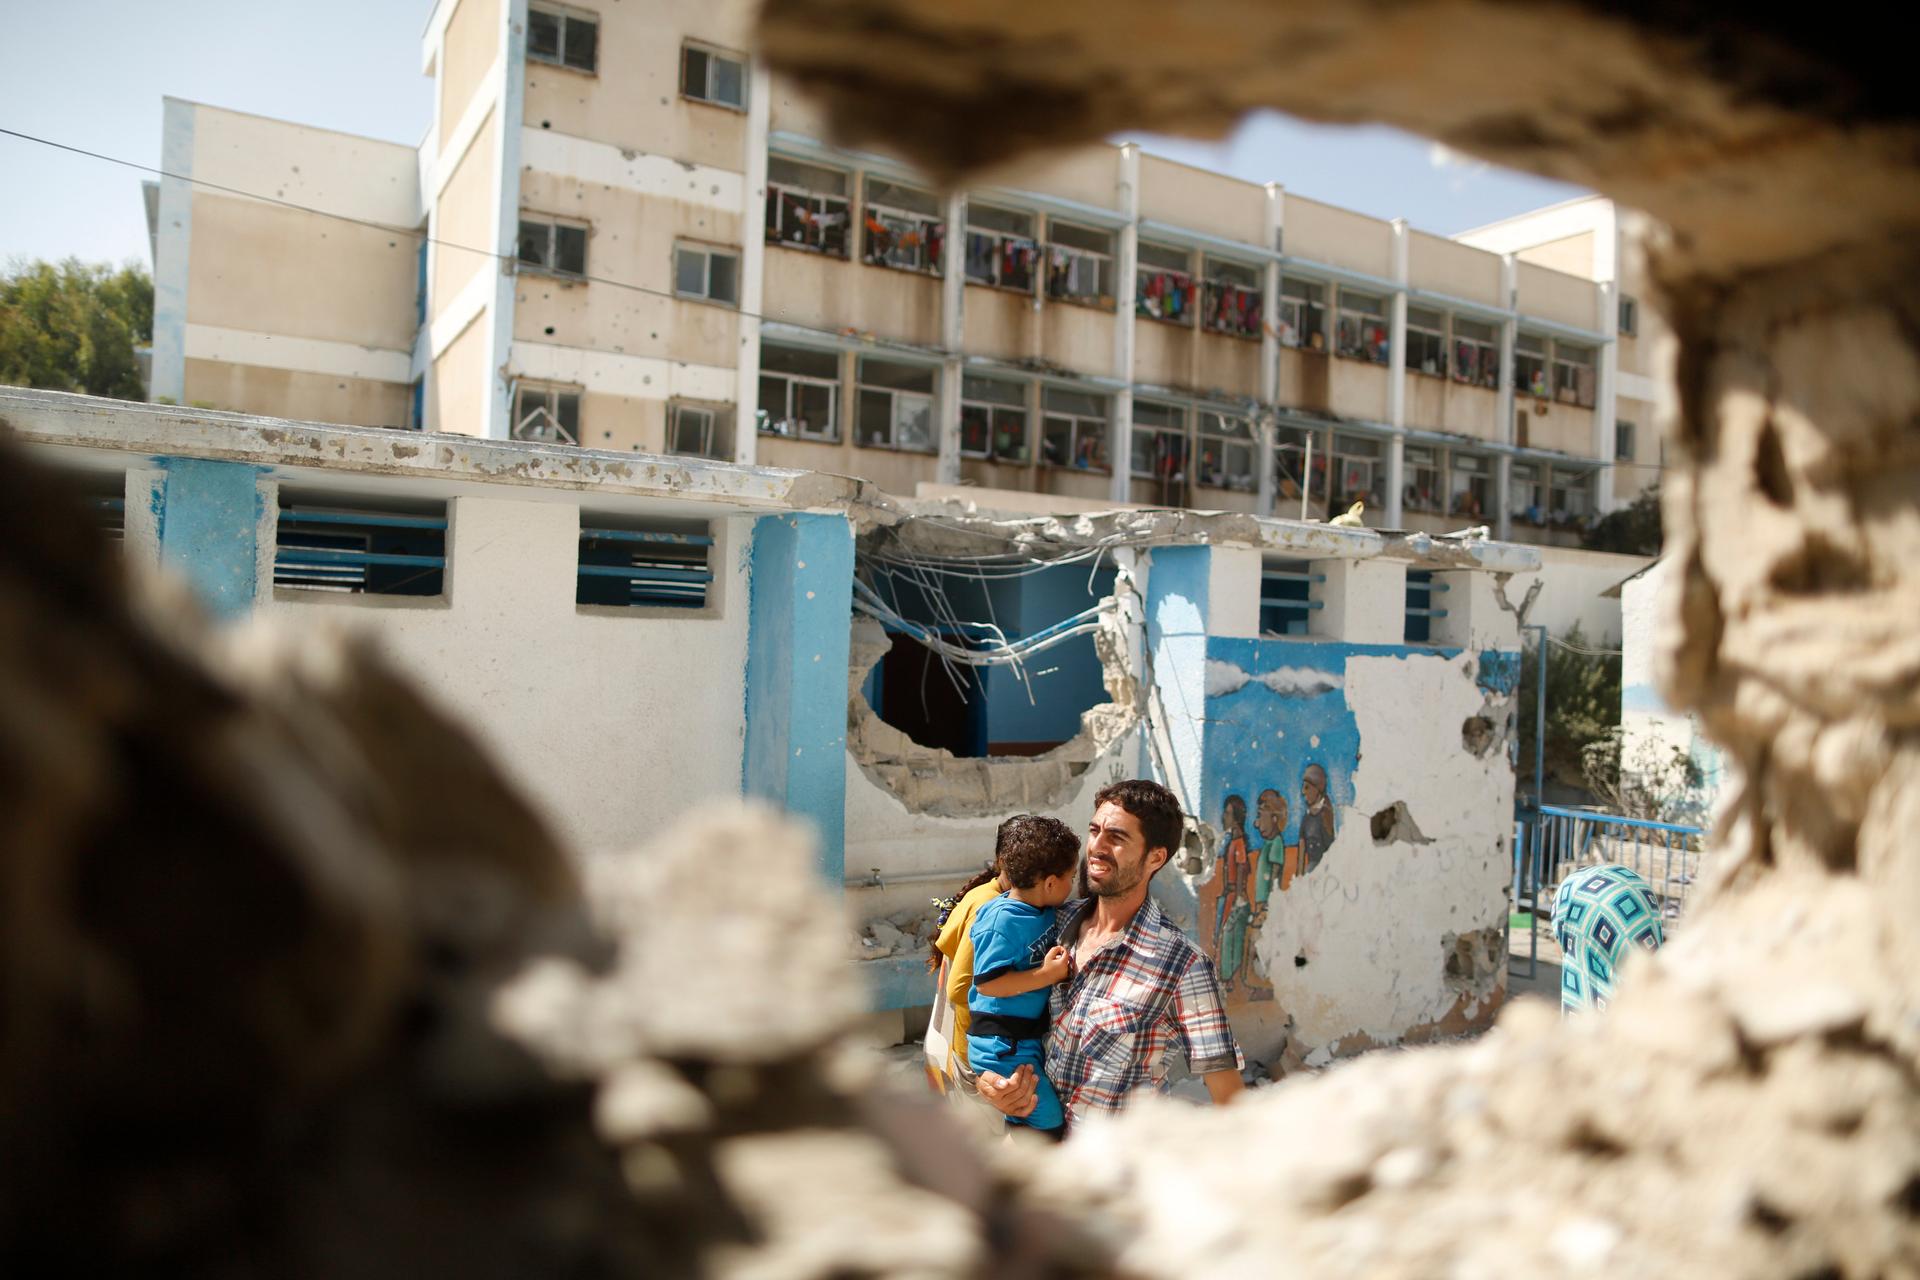 A Palestinian man, pictured through a damaged classroom, carries a boy as he walks at a United Nations-run school in the Jebaliya refugee camp in the northern Gaza Strip on July 30, 2014. Witnesses say the school, which is sheltering Palestinians displace